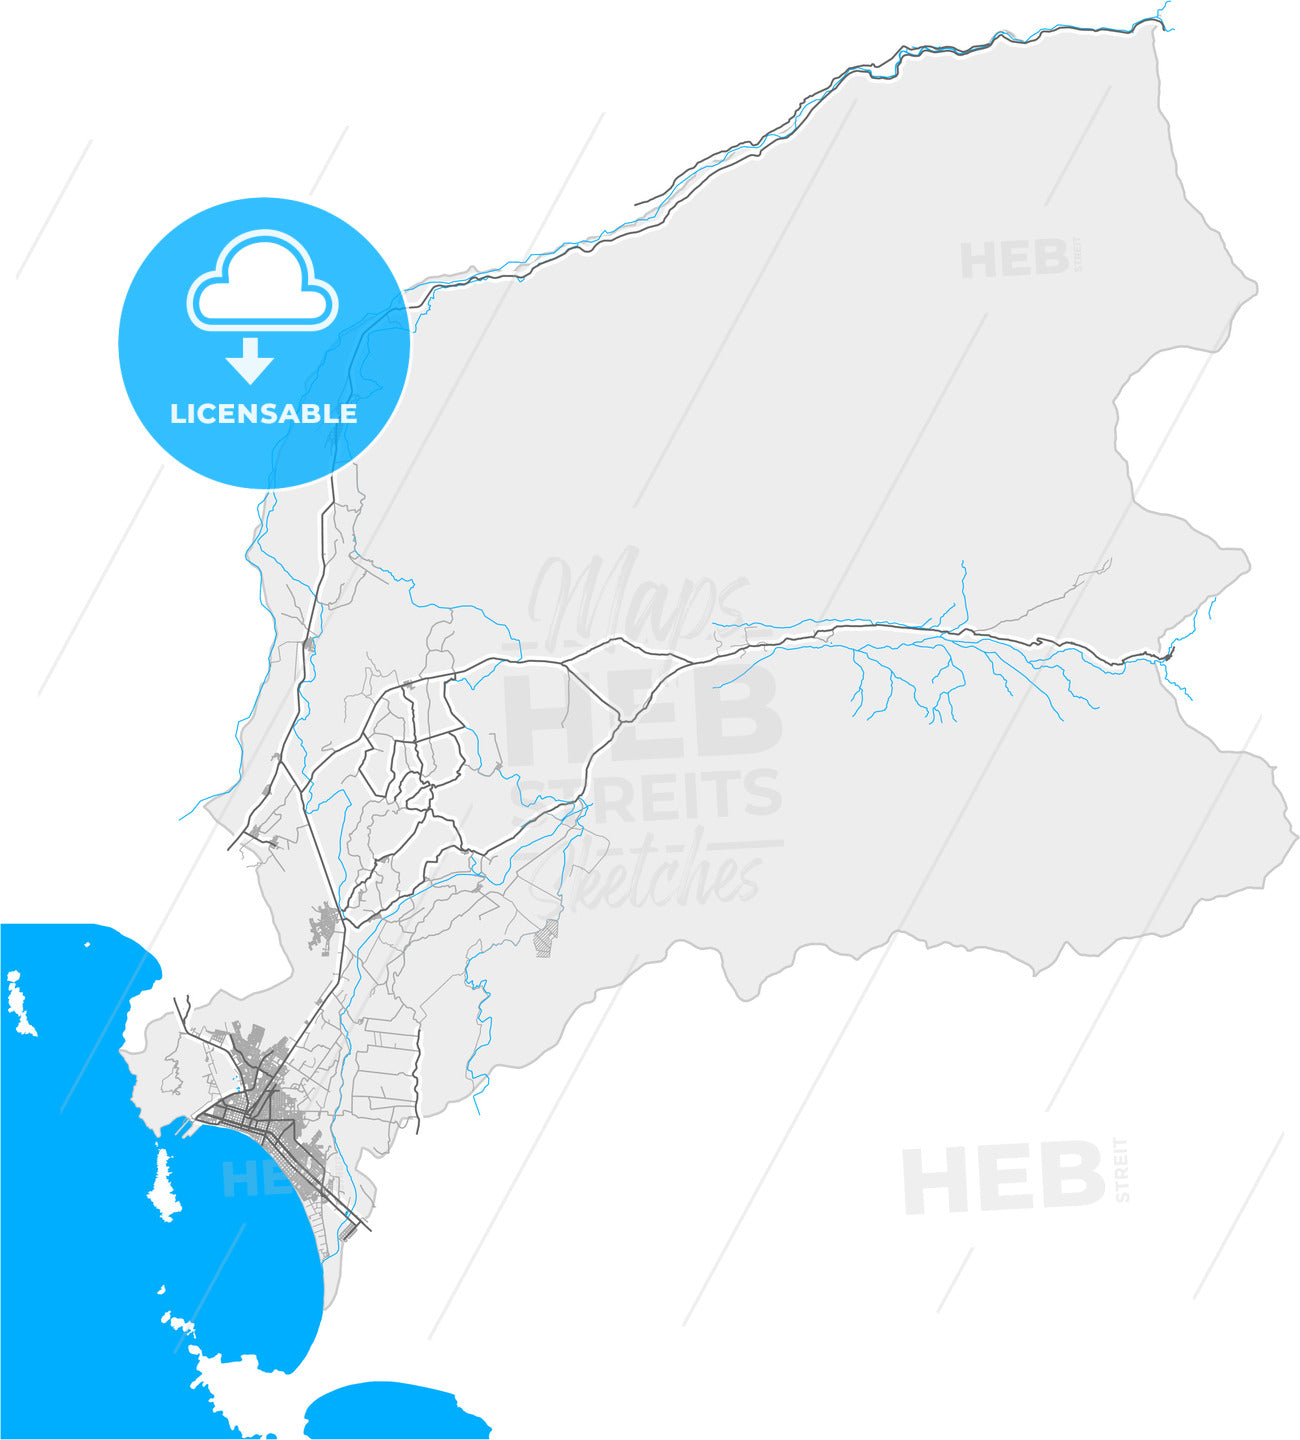 Chimbote, Peru, high quality vector map